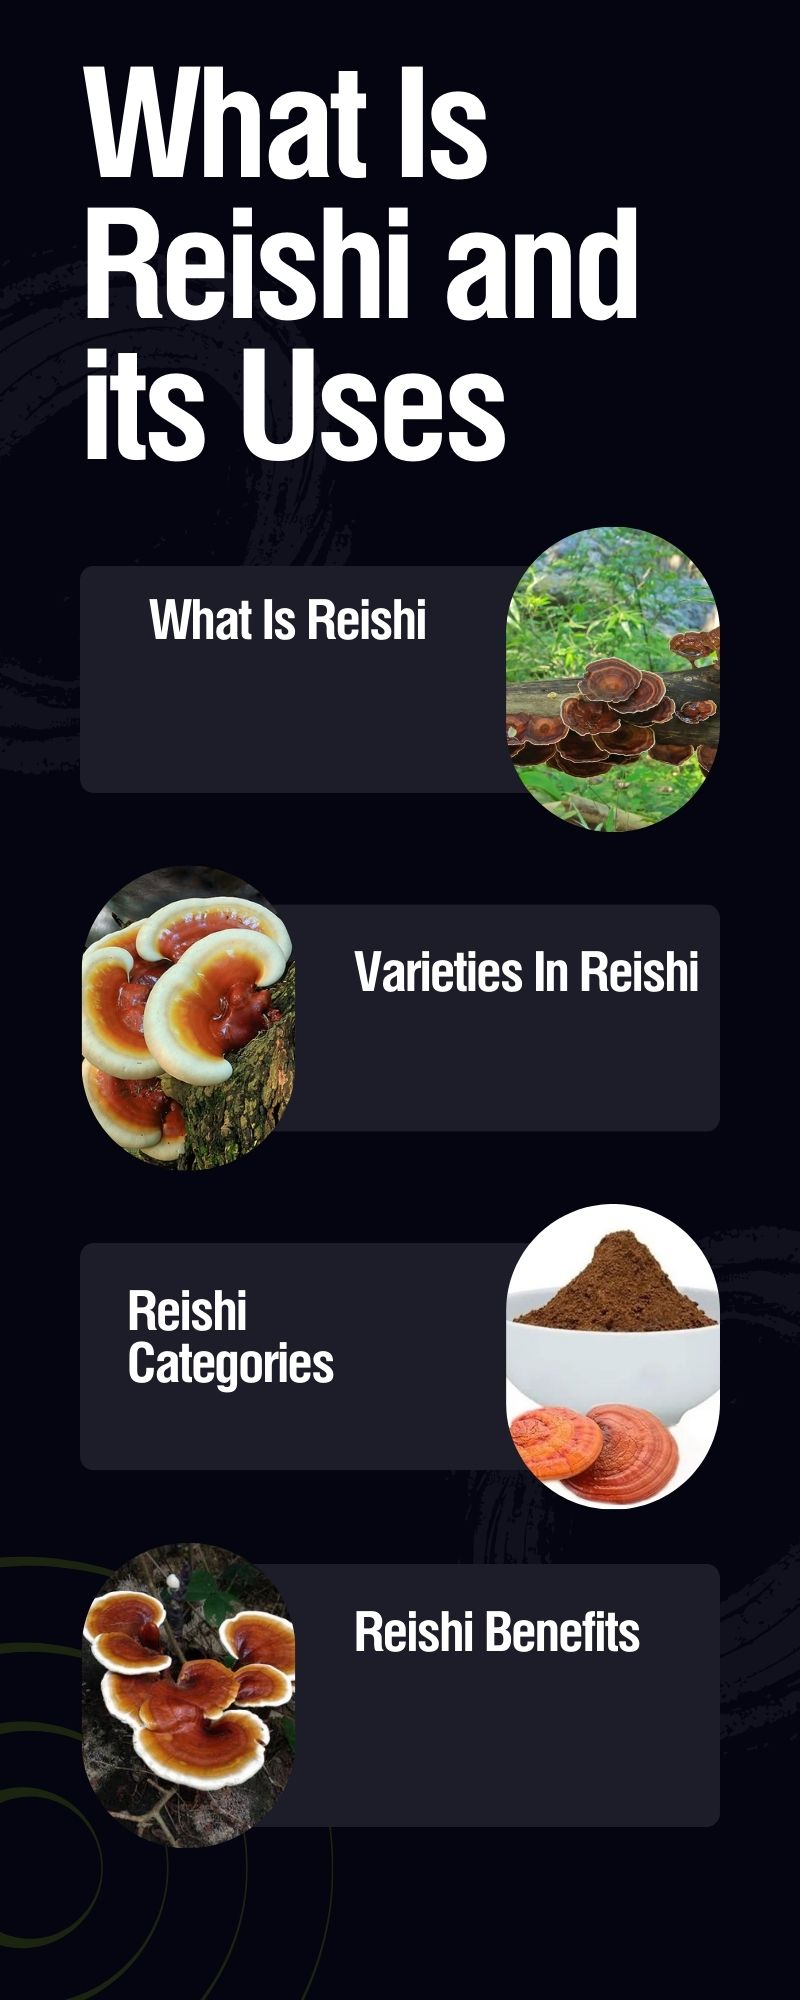 What Is Reishi and its Uses